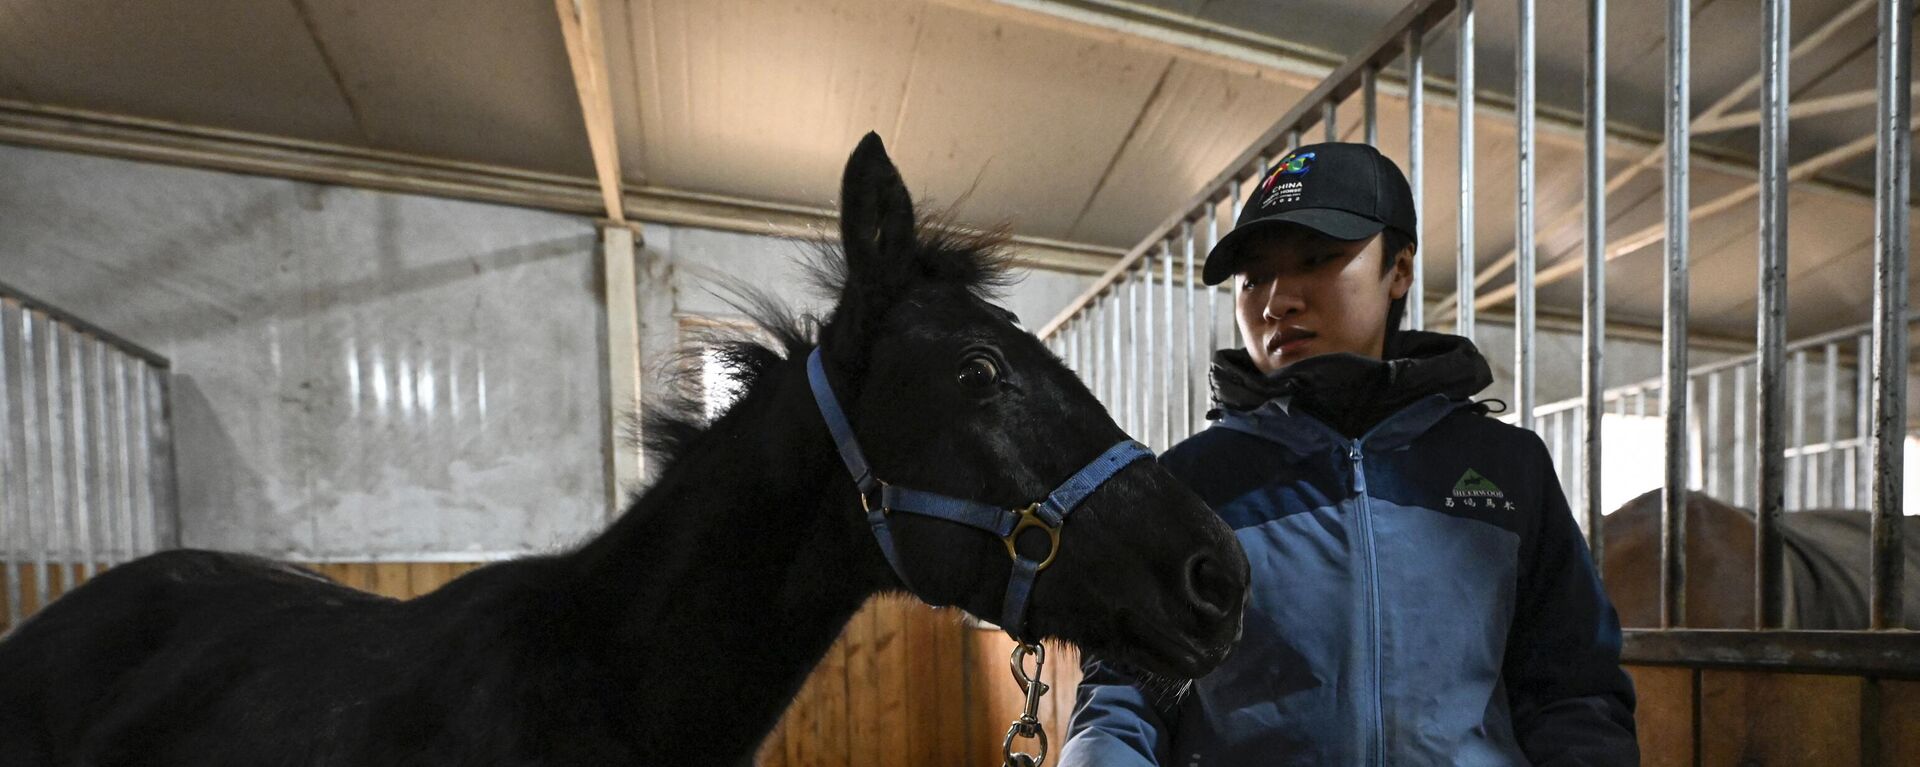 Zhuangzhuang, the country's first cloned horse bred by Chinese company Sinogene, is seen with animal trainer Yin Chuyun at a stable at Sheerwood horse riding club in Beijing on January 12, 2023.  - Sputnik International, 1920, 12.01.2023